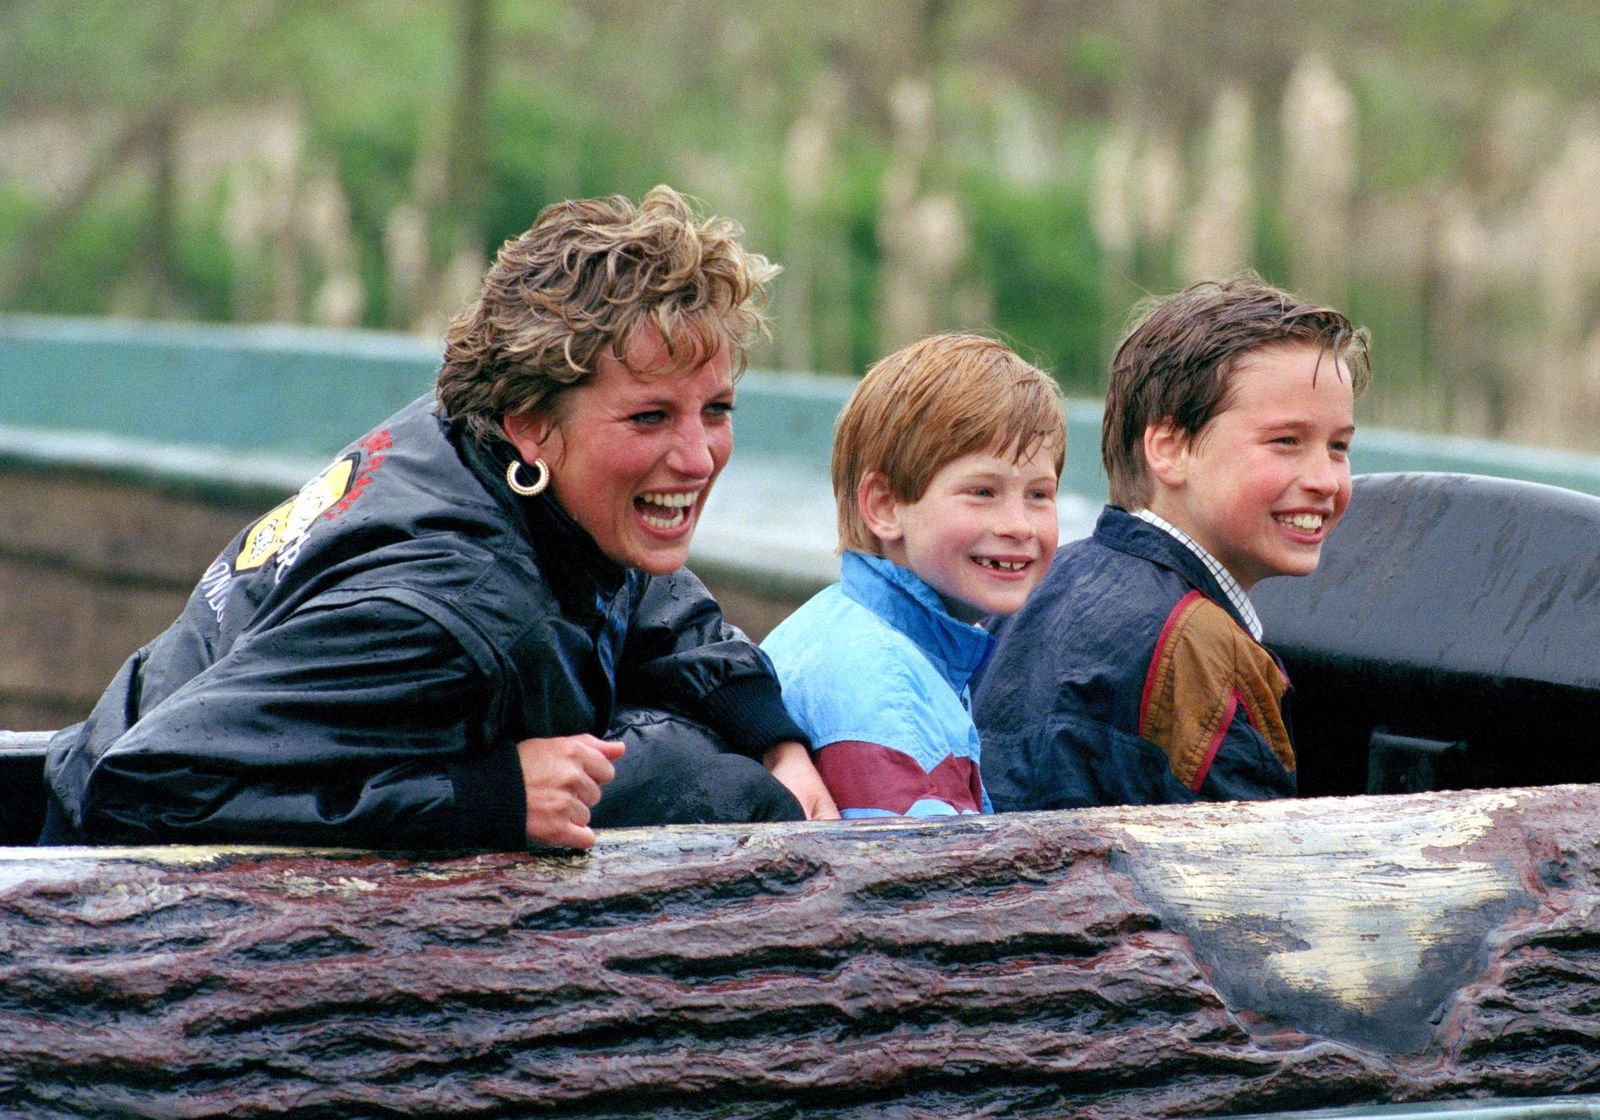 Princess Diana, Prince William, and Prince Harry at The "Thorpe Park" Amusement Park on April 13, 1993 | Photo: Julian Parker/UK Press/Getty Images